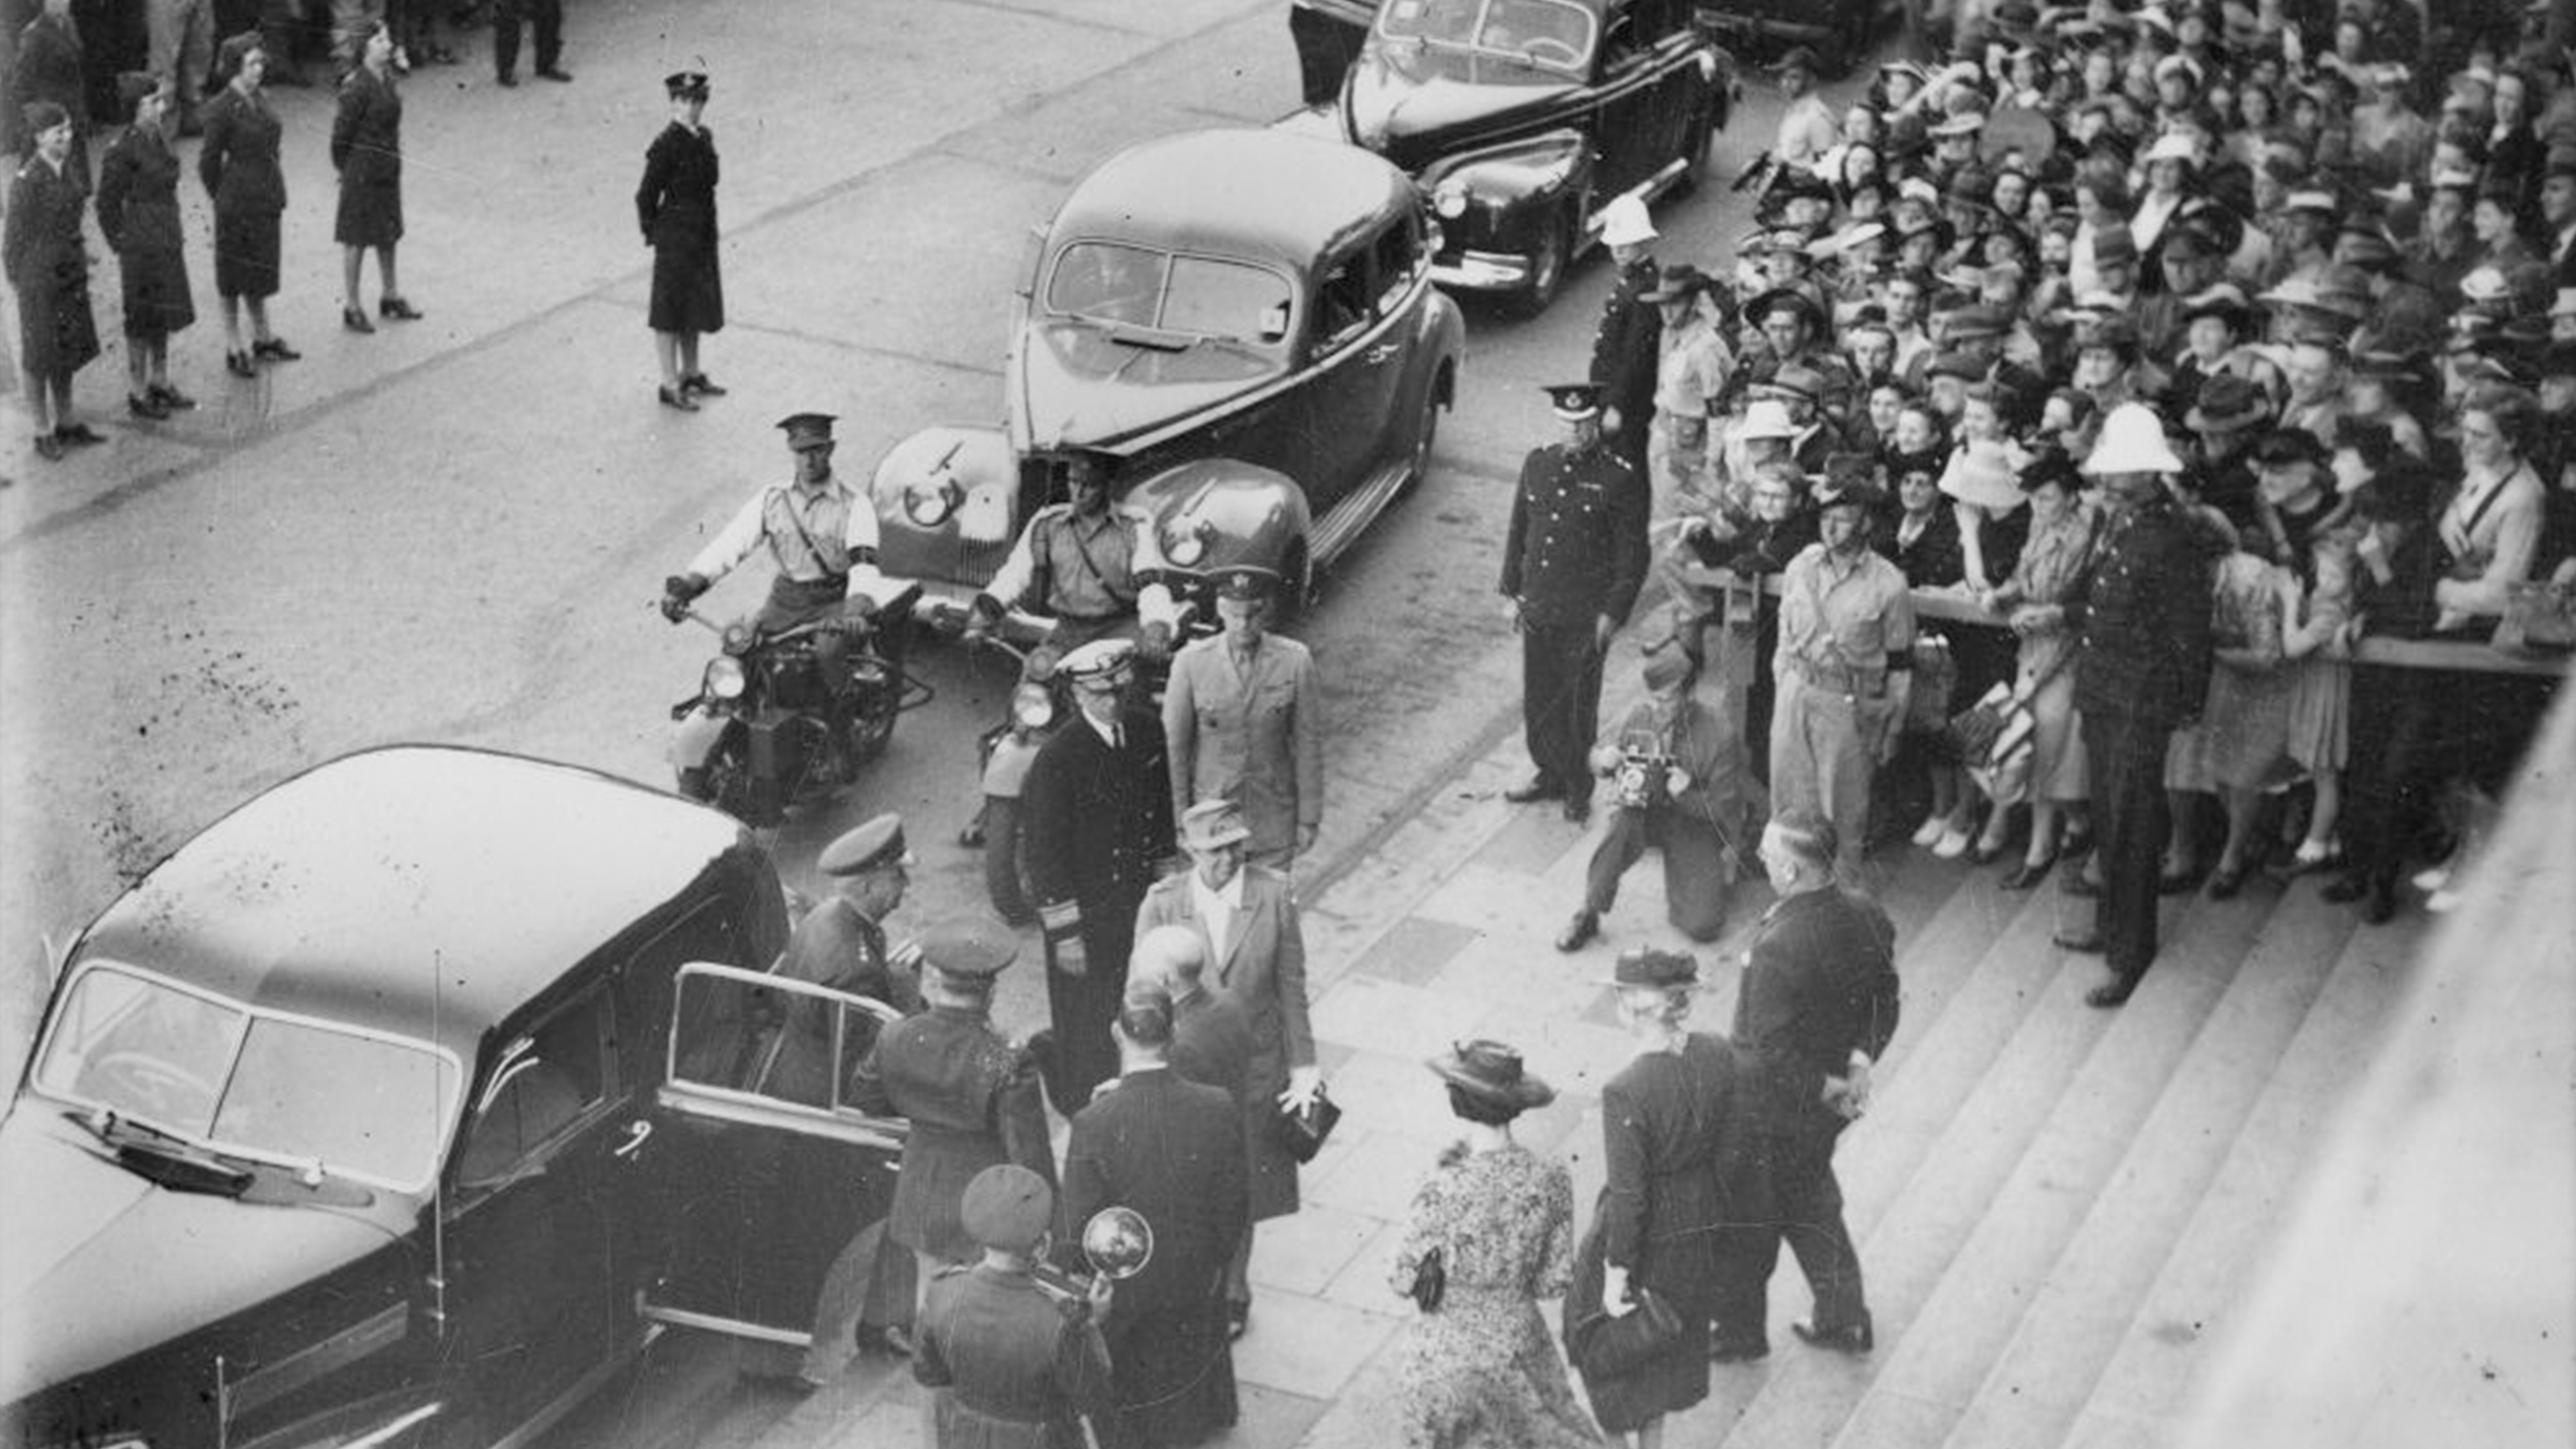 Eleanor Roosevelt stands on the steps of Brisbane City Hall and is greeted by government officials, press and excited members of the public. Her motorcade stretches back into the distance.